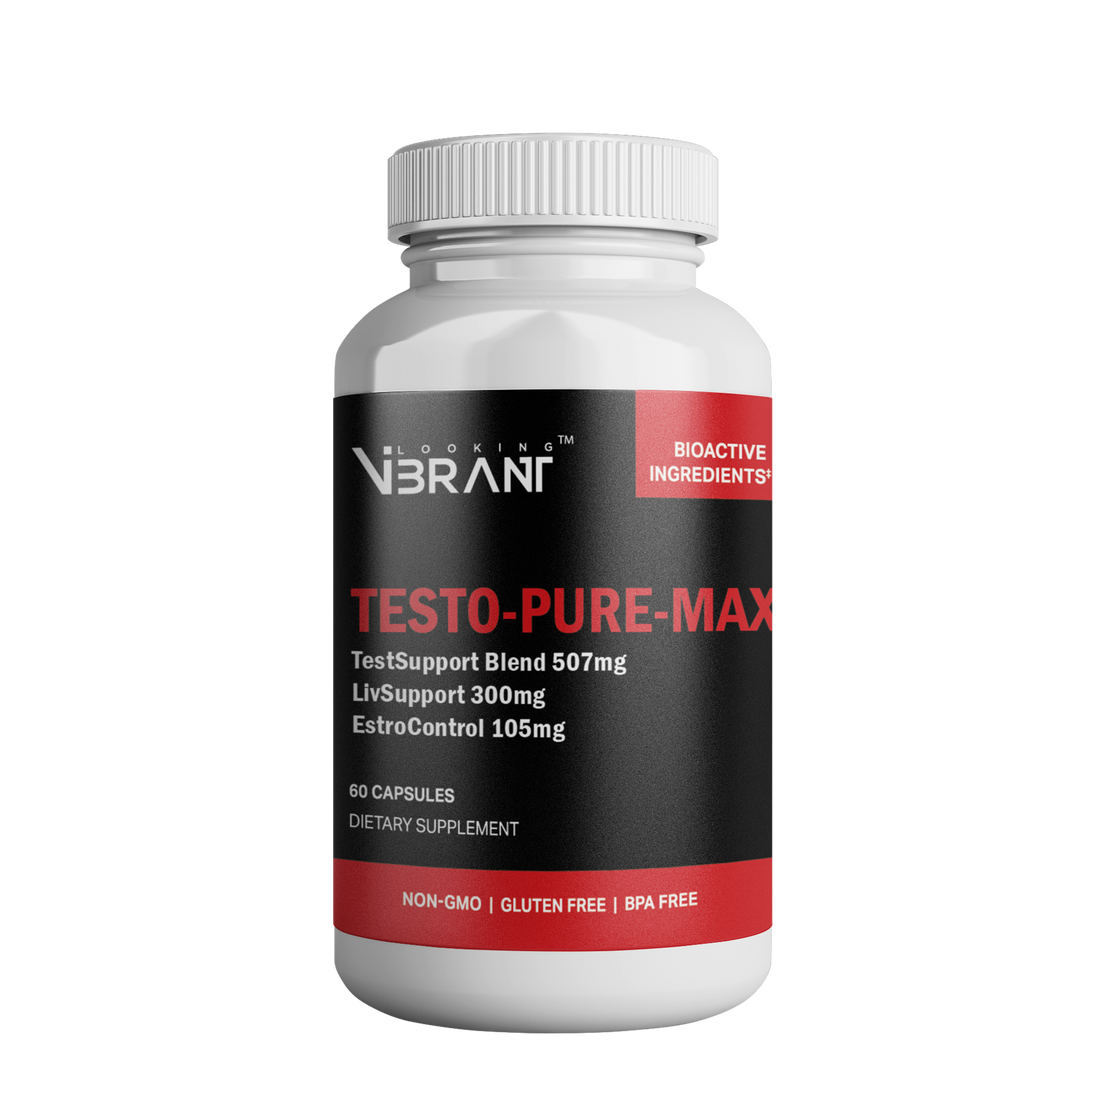 TESTOSTERONE: NATURAL BOOST FOR MORE ENERGY AND BETTER SLEEP 😴